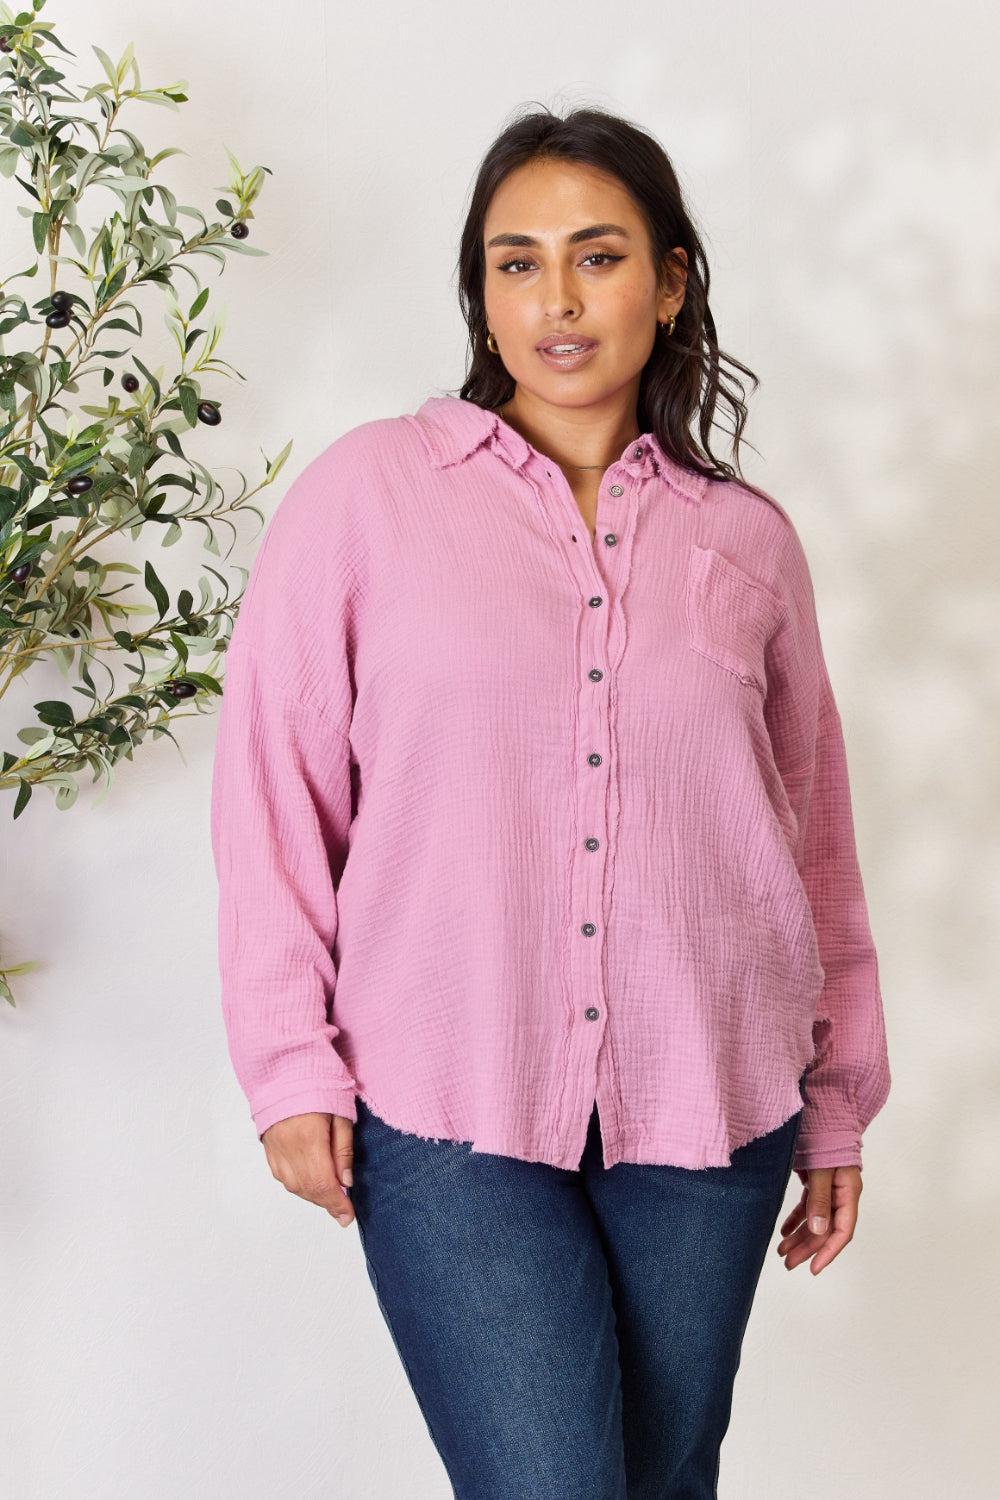 a woman wearing a pink shirt and jeans